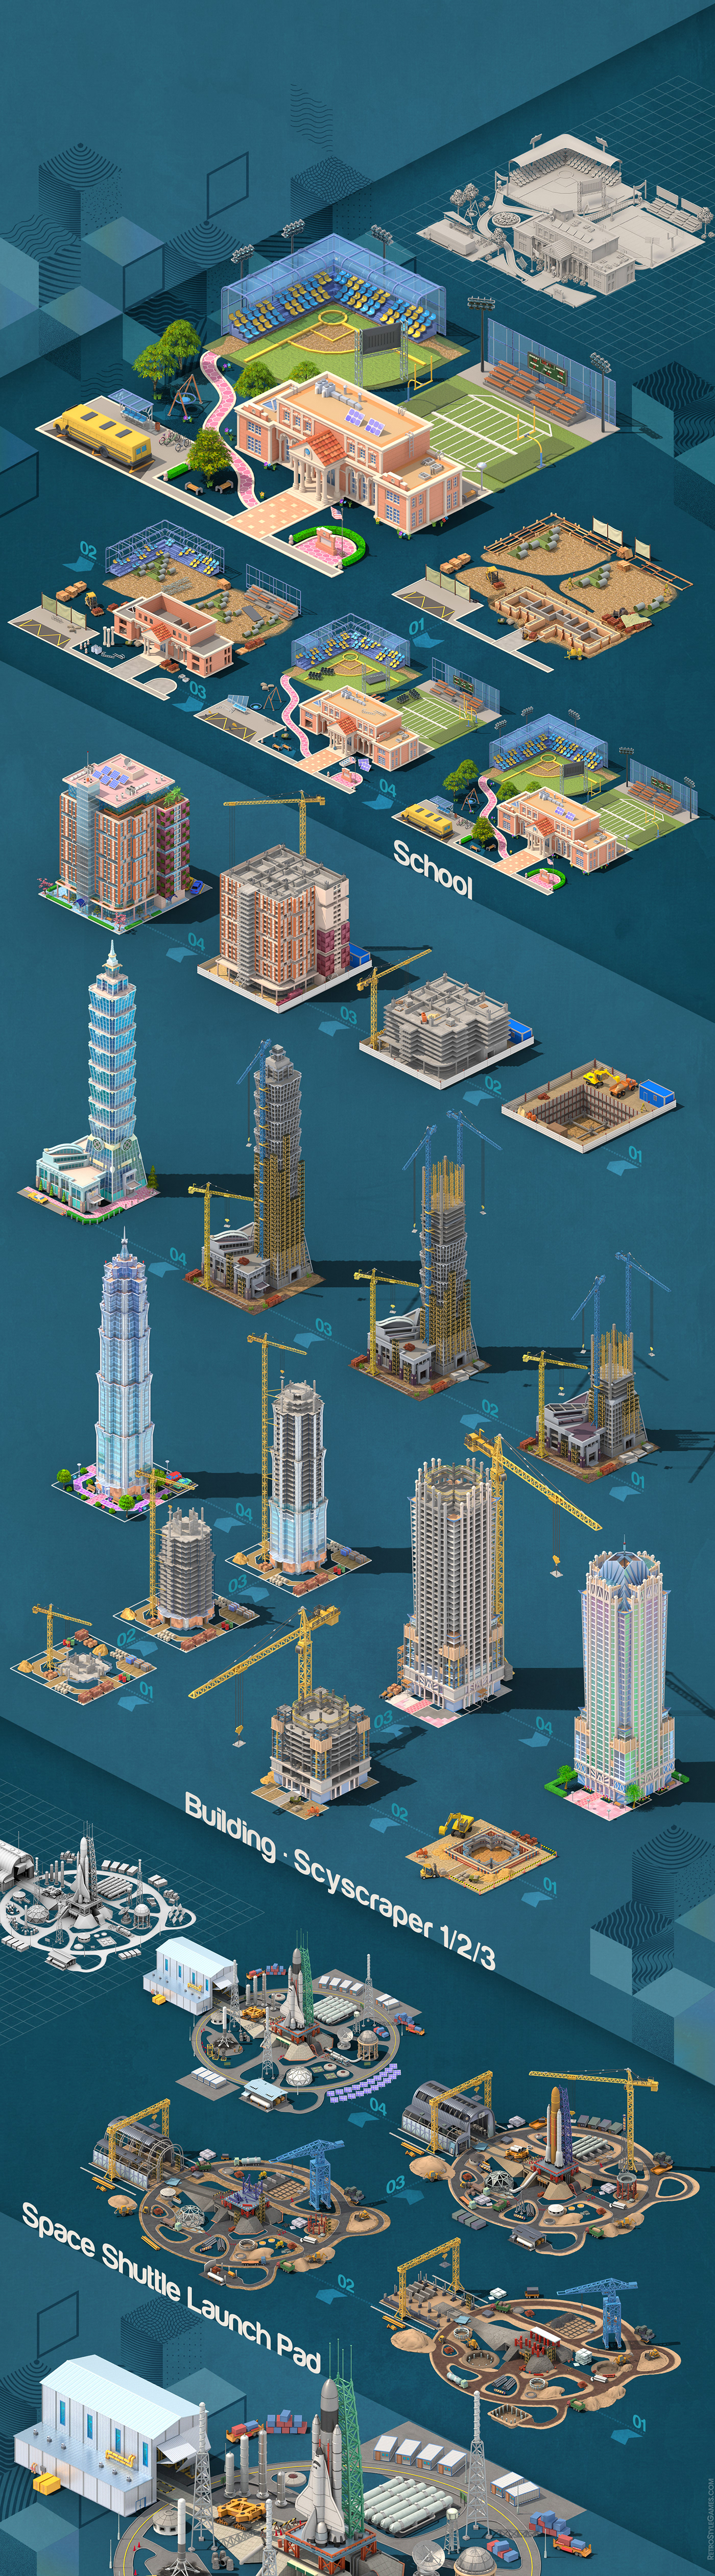 builder buildit Cities construction infrastructure simcity simulator skylines town Tycoon